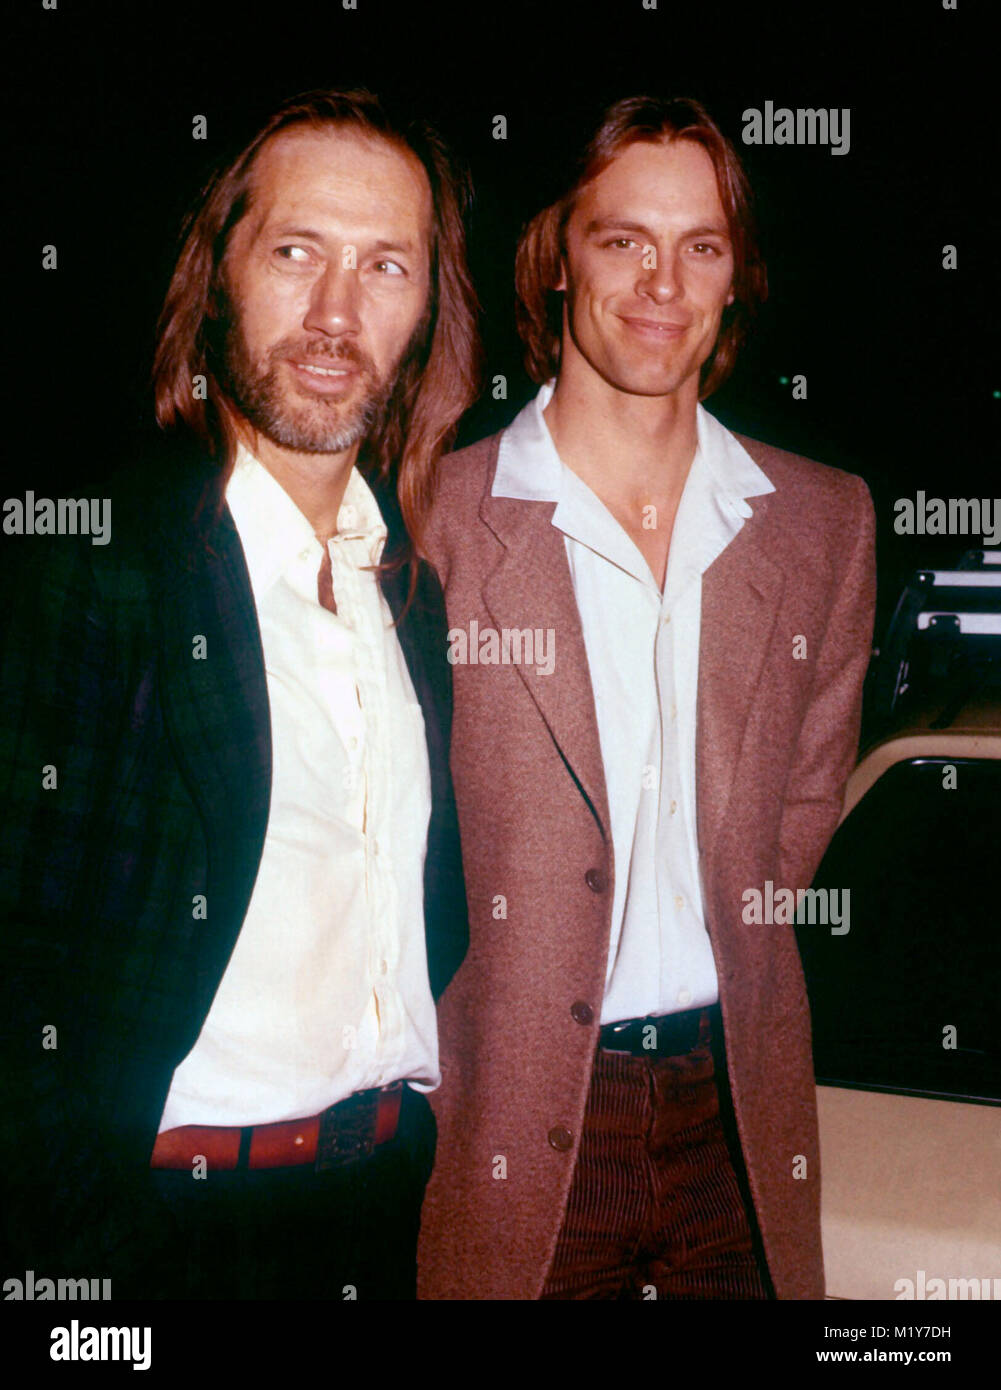 HOLLYWOOD, CA - DECEMBER 18: (L-R) Actors/brothers David Carradine and Keith Carradine arrive  at Merv Griffin Television taping on December 18, 1979 in Hollywood, California. Photo by Barry King/Alamy Stock Photo Stock Photo